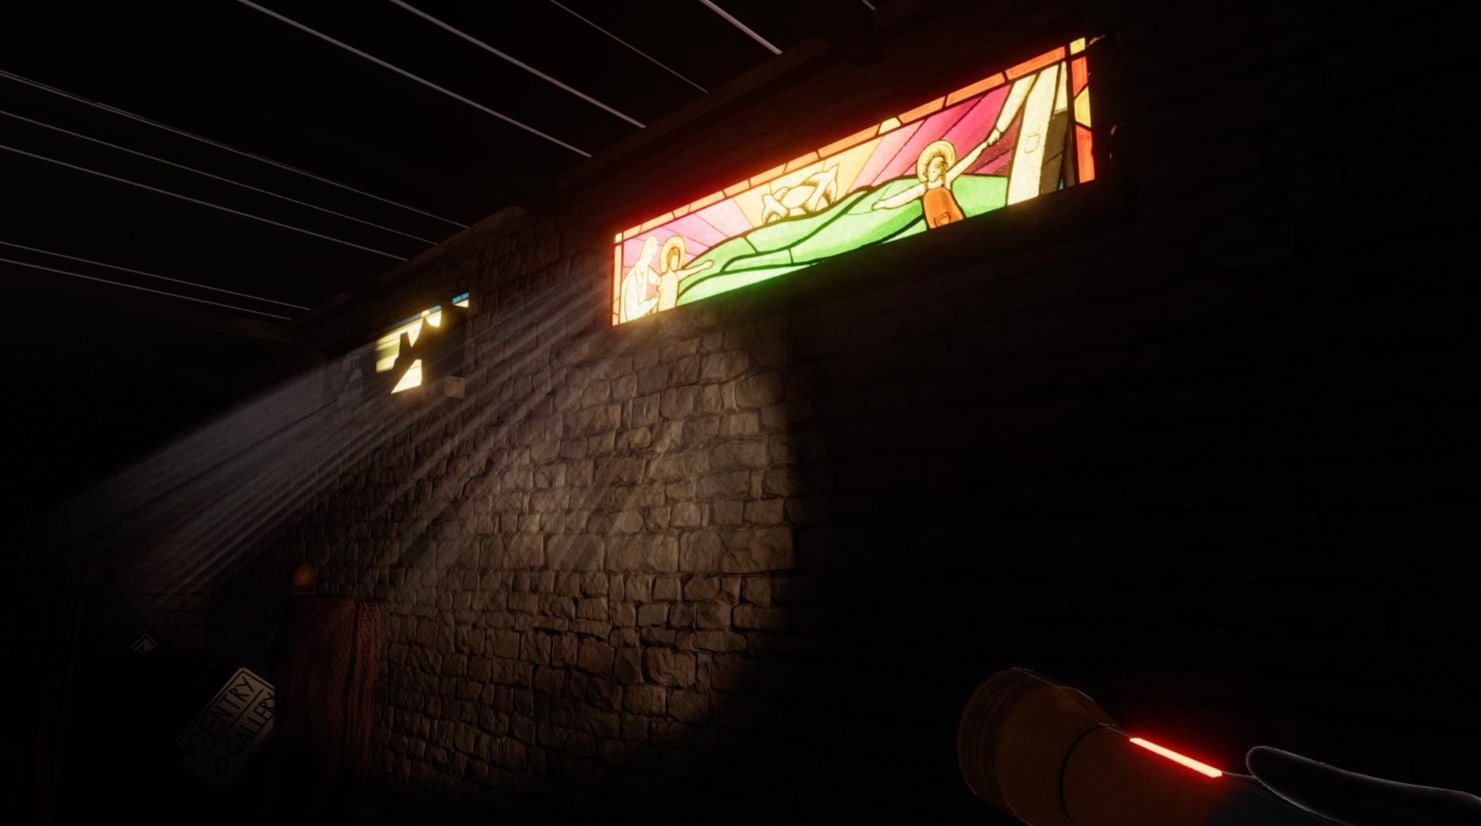 In-game screenshot focusing on a stained glass window through which beams of light stream, assumedly from a car outside. Perspective is limited by the reach of the torchlight, so little beyond the window is discernible, but the exterior light source 